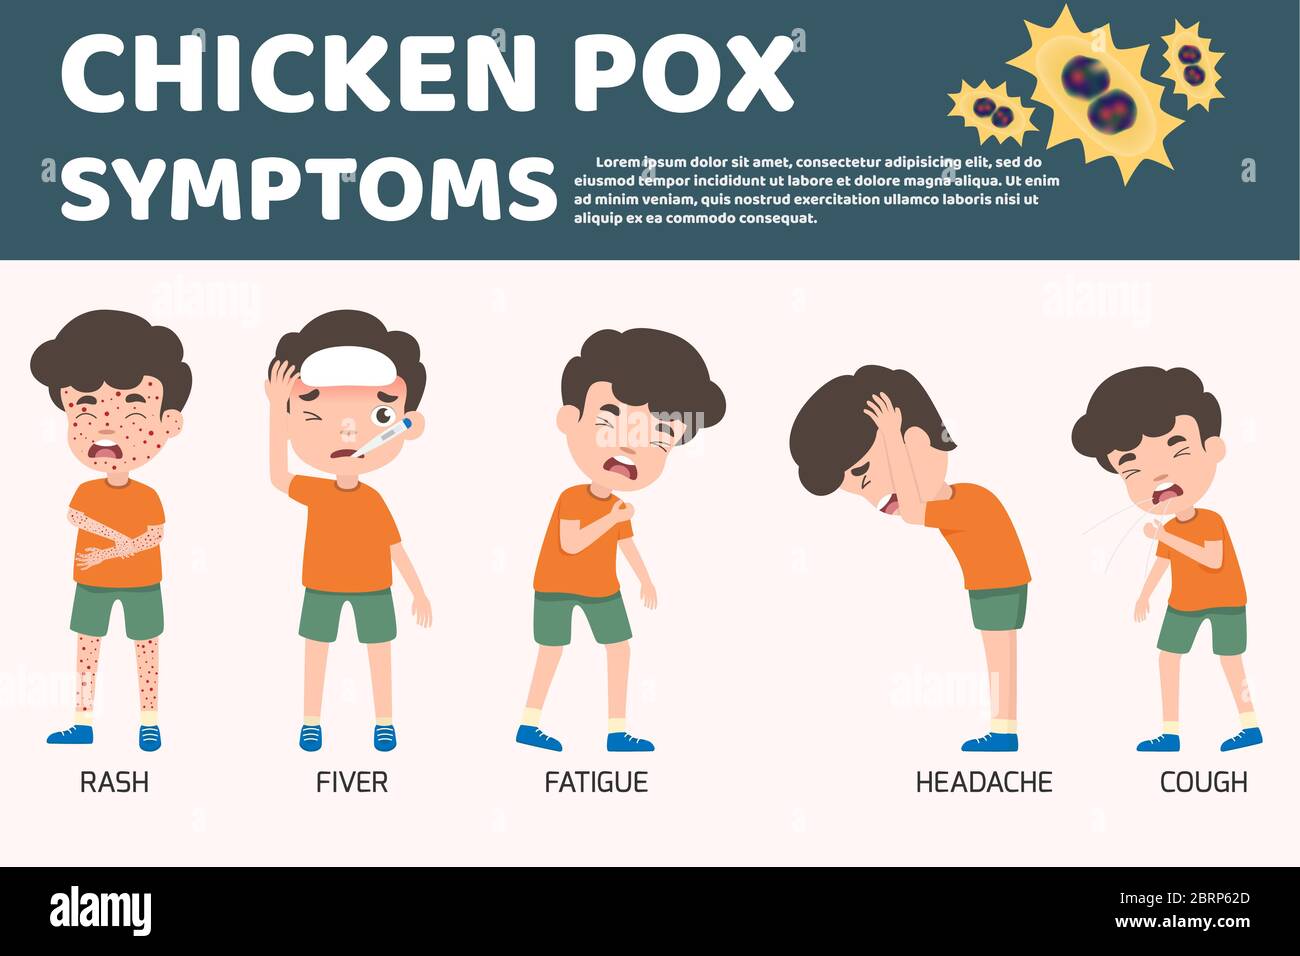 Children Has Chicken Pox Infographic Poster Children Fever And Chickenpox Symptoms And Prevention Health Care And Medical Cartoon Character Vector Stock Vector Image Art Alamy